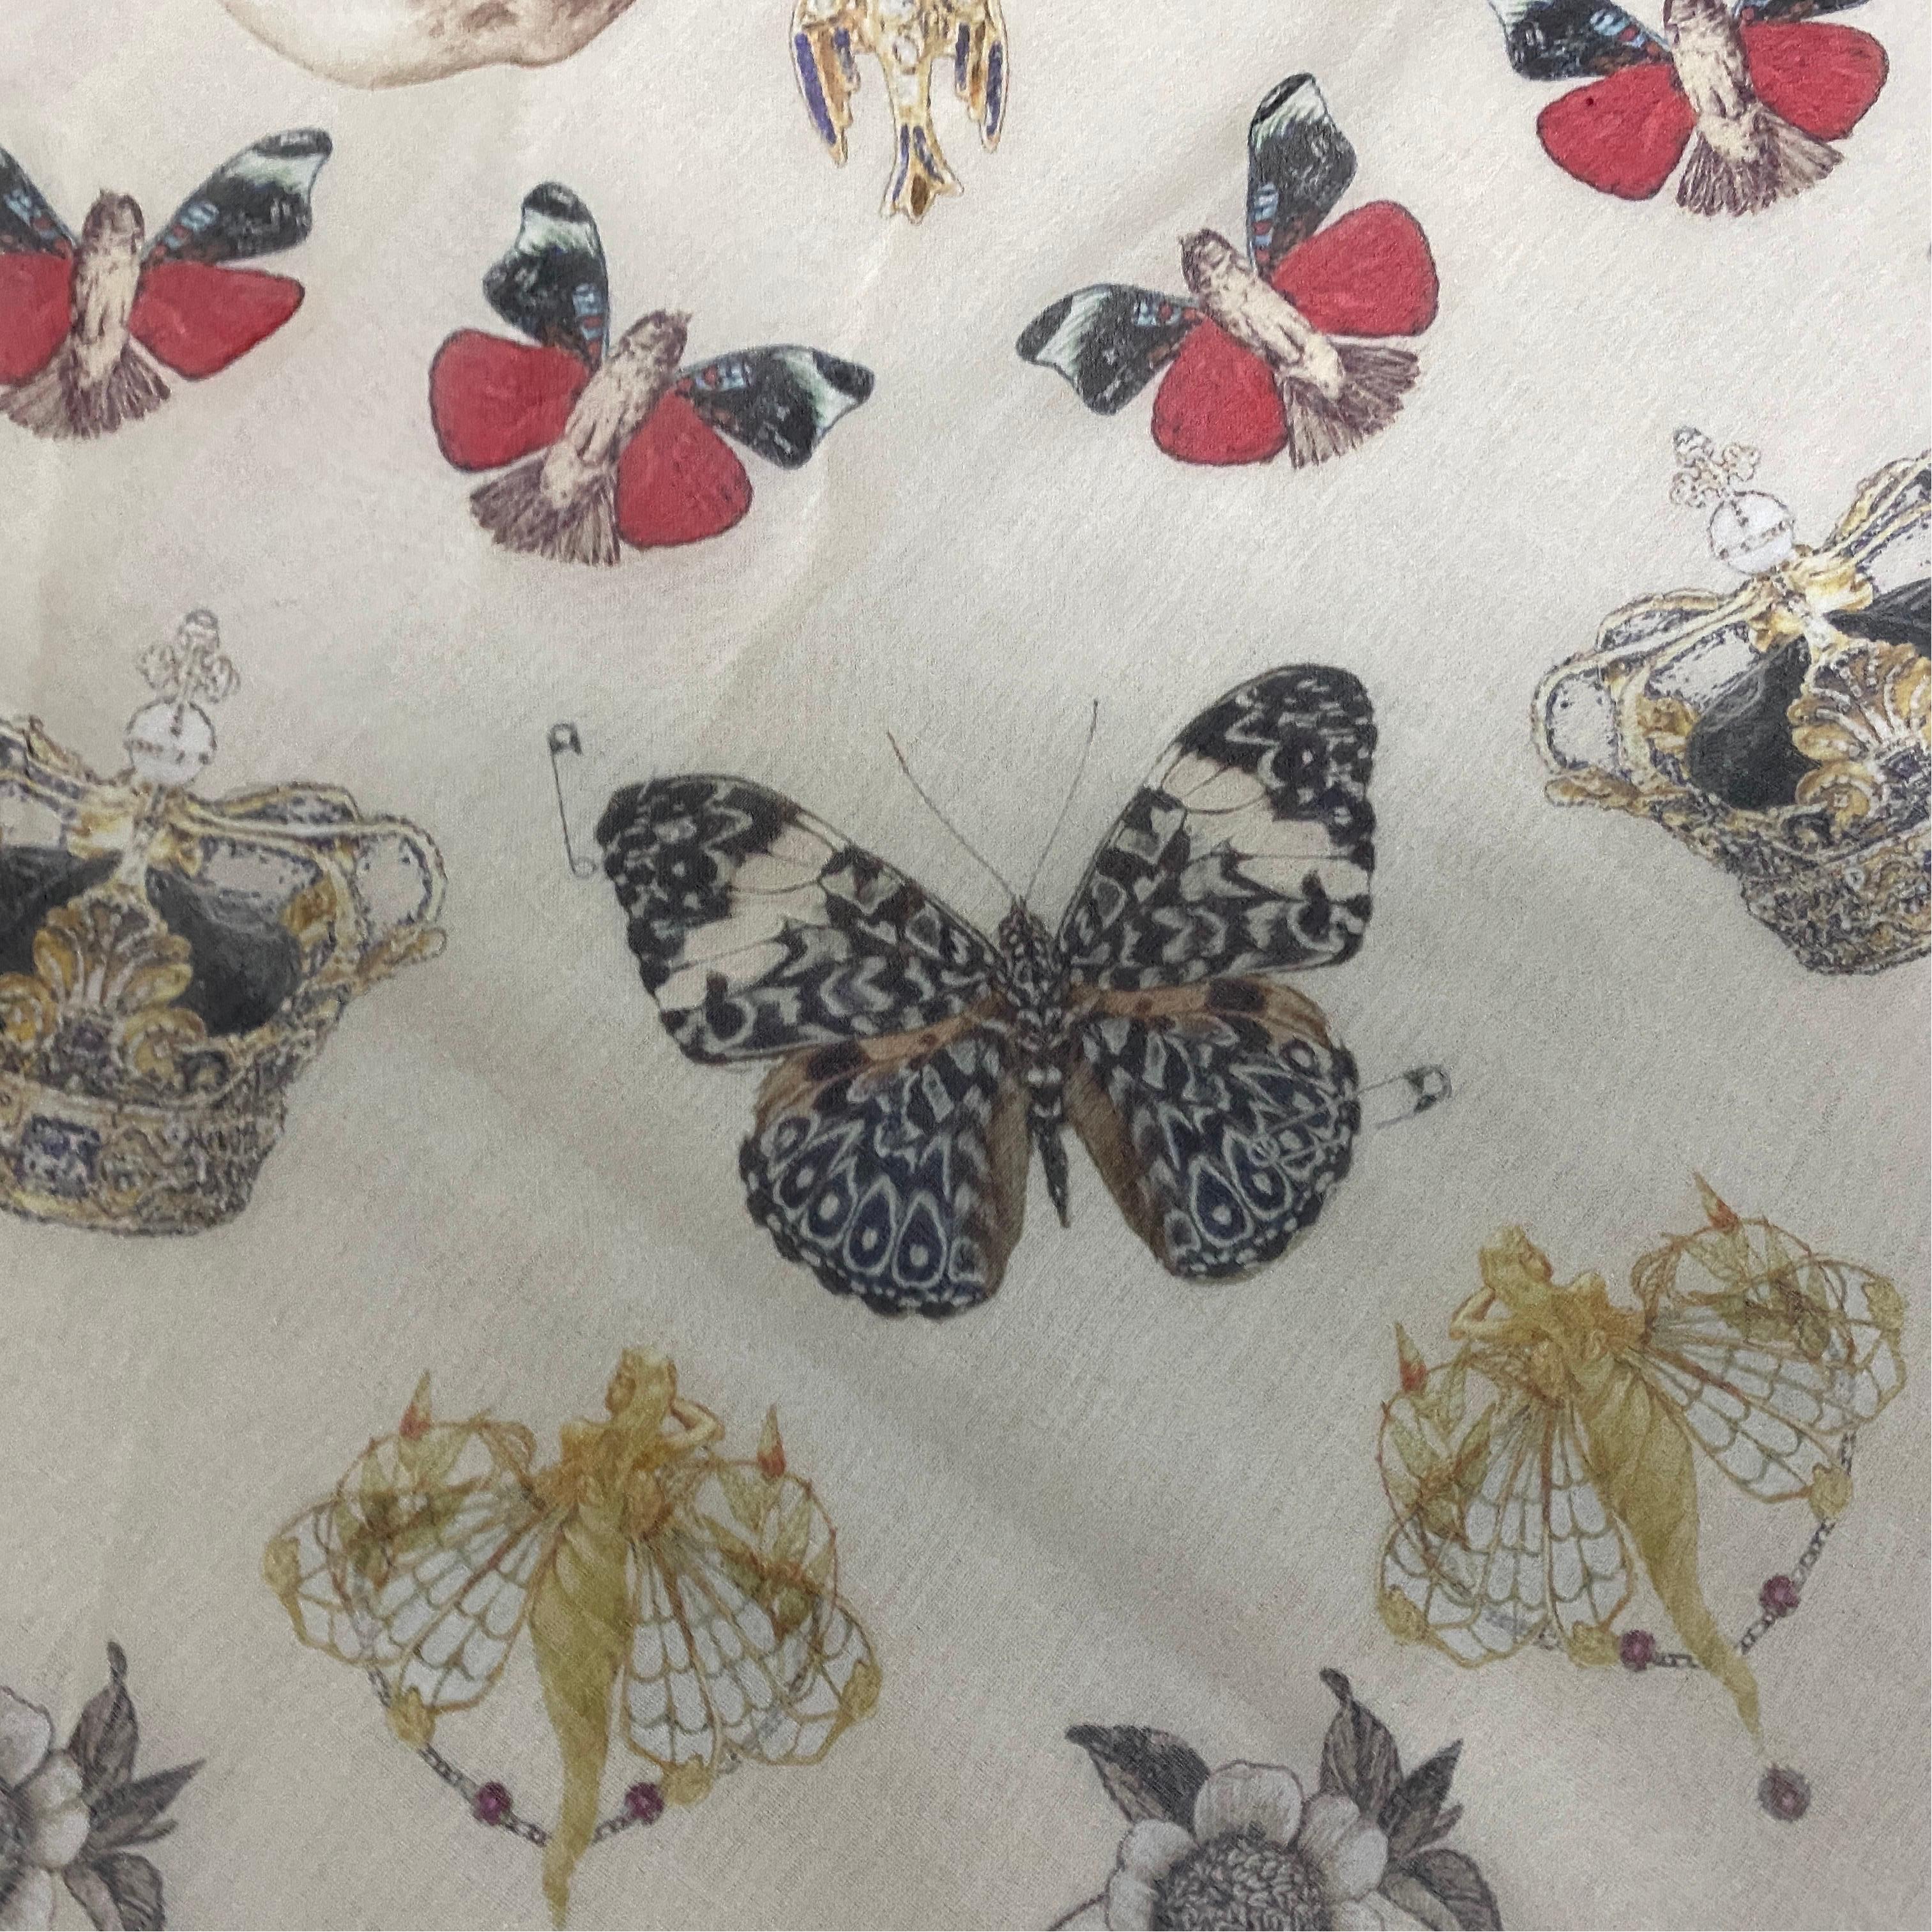 An Iconic Policrome Silk Scarf by Alexander McQueen Manufactured in Italy For Sale 3